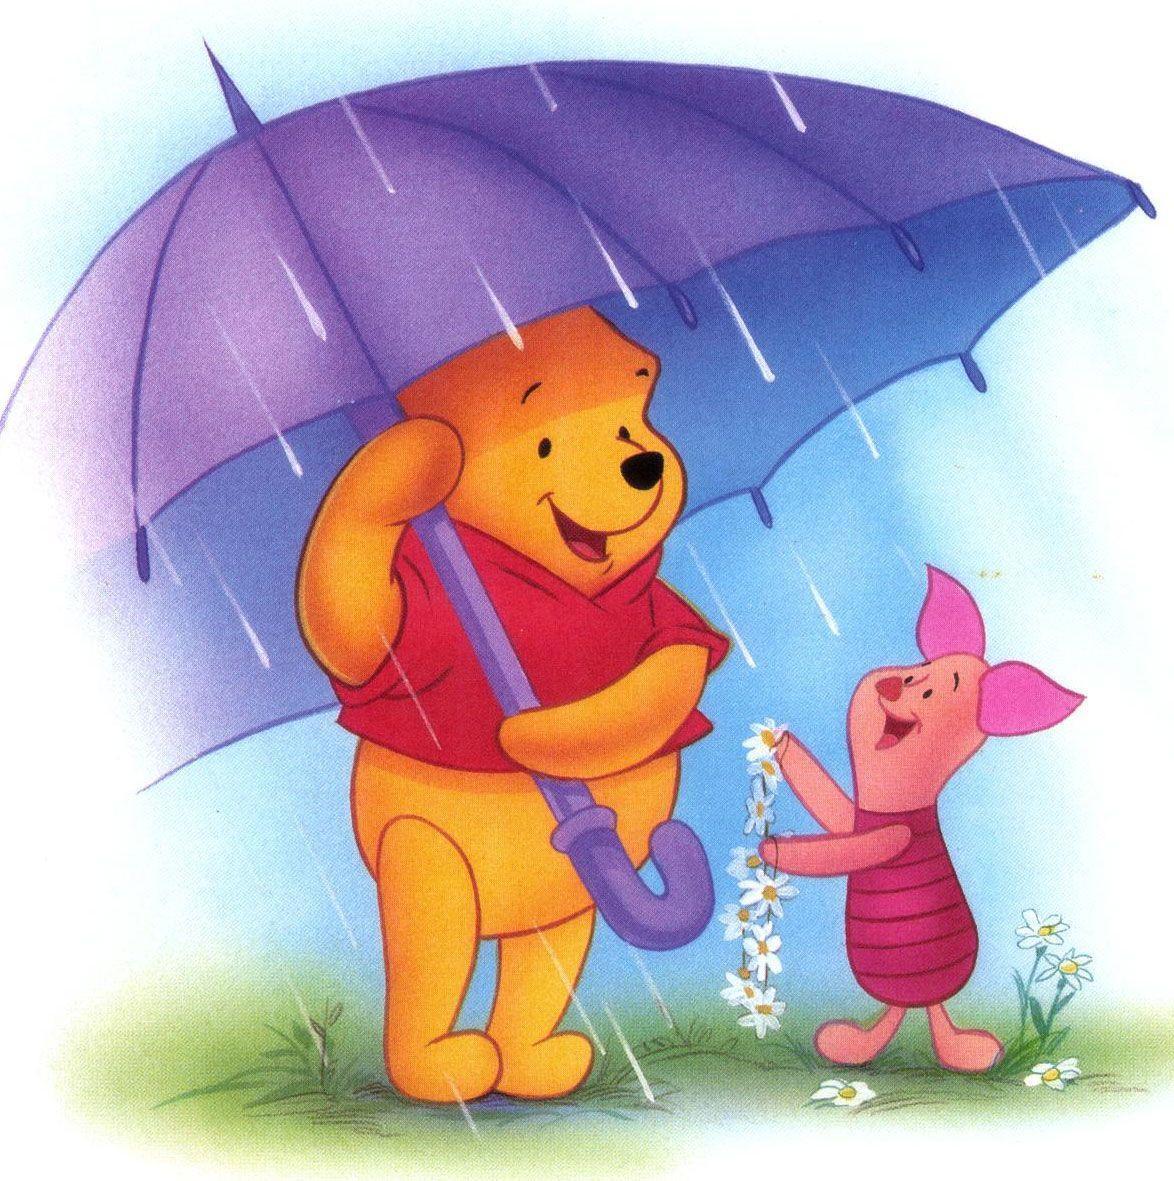 Pooh Picture: 50 Pooh Bear jpeg Picture by Disney for download